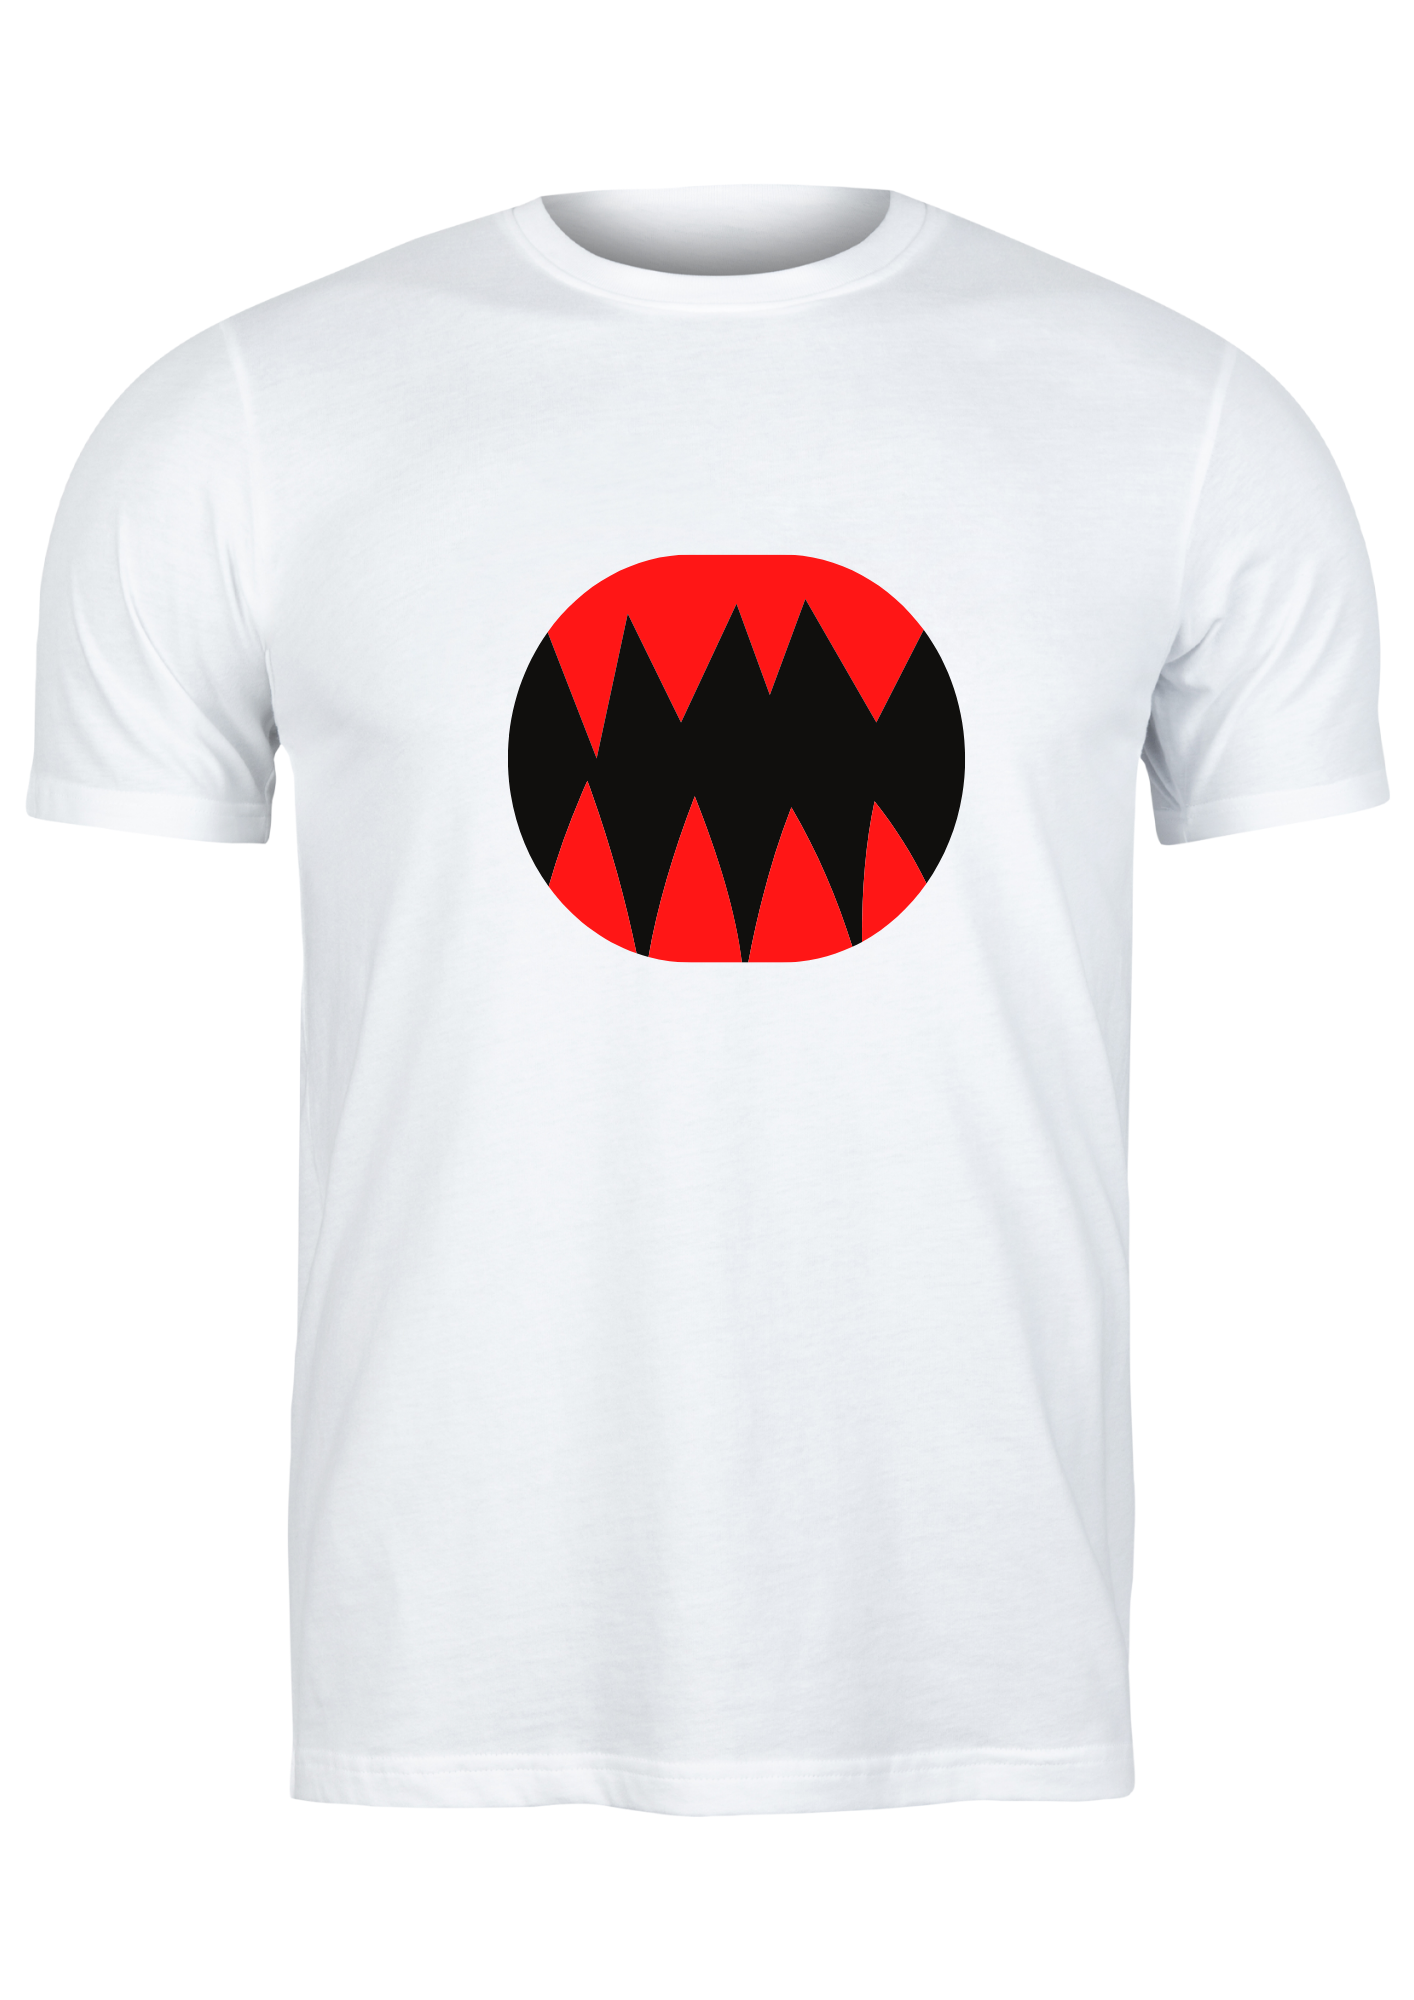 Unisex Tshirt Printed Abstract Fangs